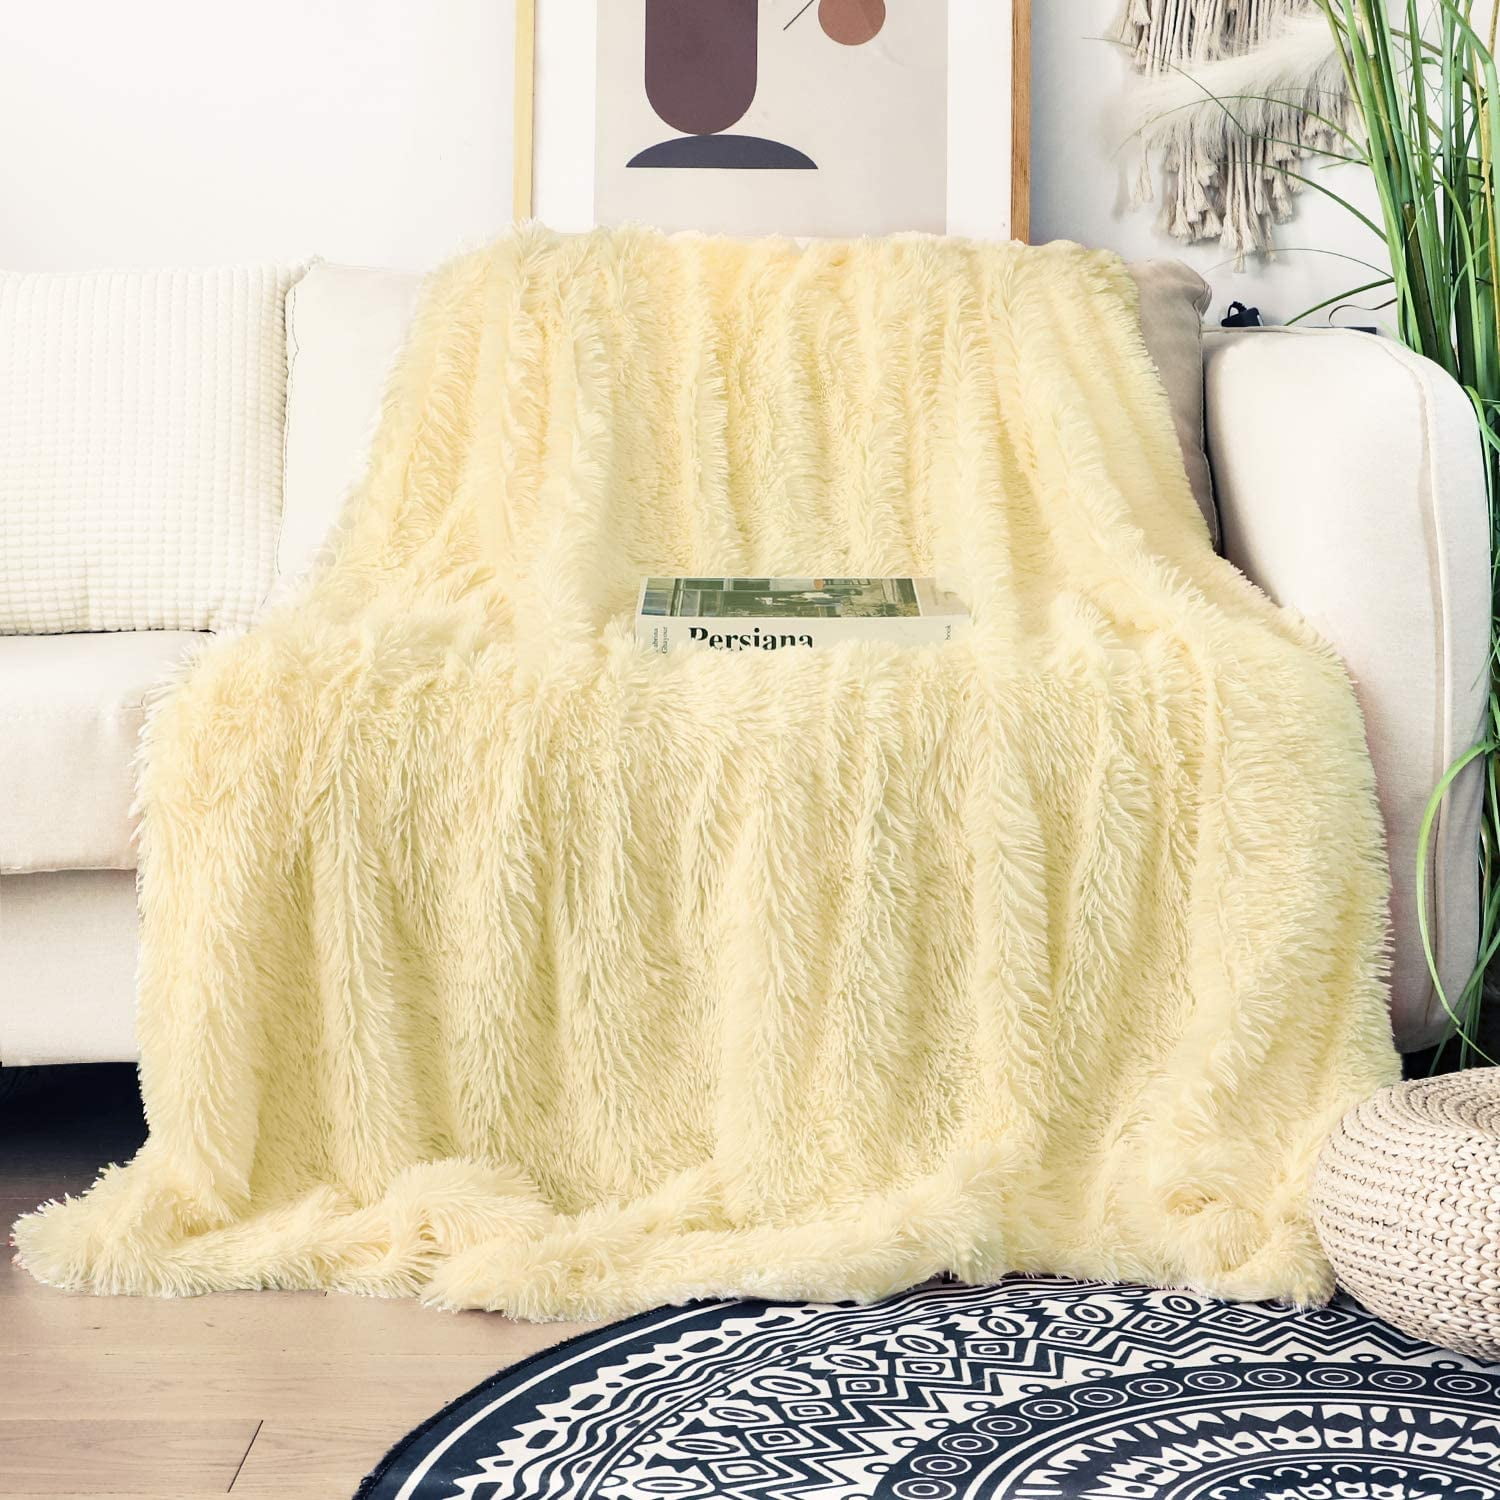 Cute Super Soft Fuzzy Light Weight Luxurious Cozy Warm Microfiber 50 × 60 Inches Decoration Blanket for Couch Sofa Bed Chair Rainbow Throw Blanket